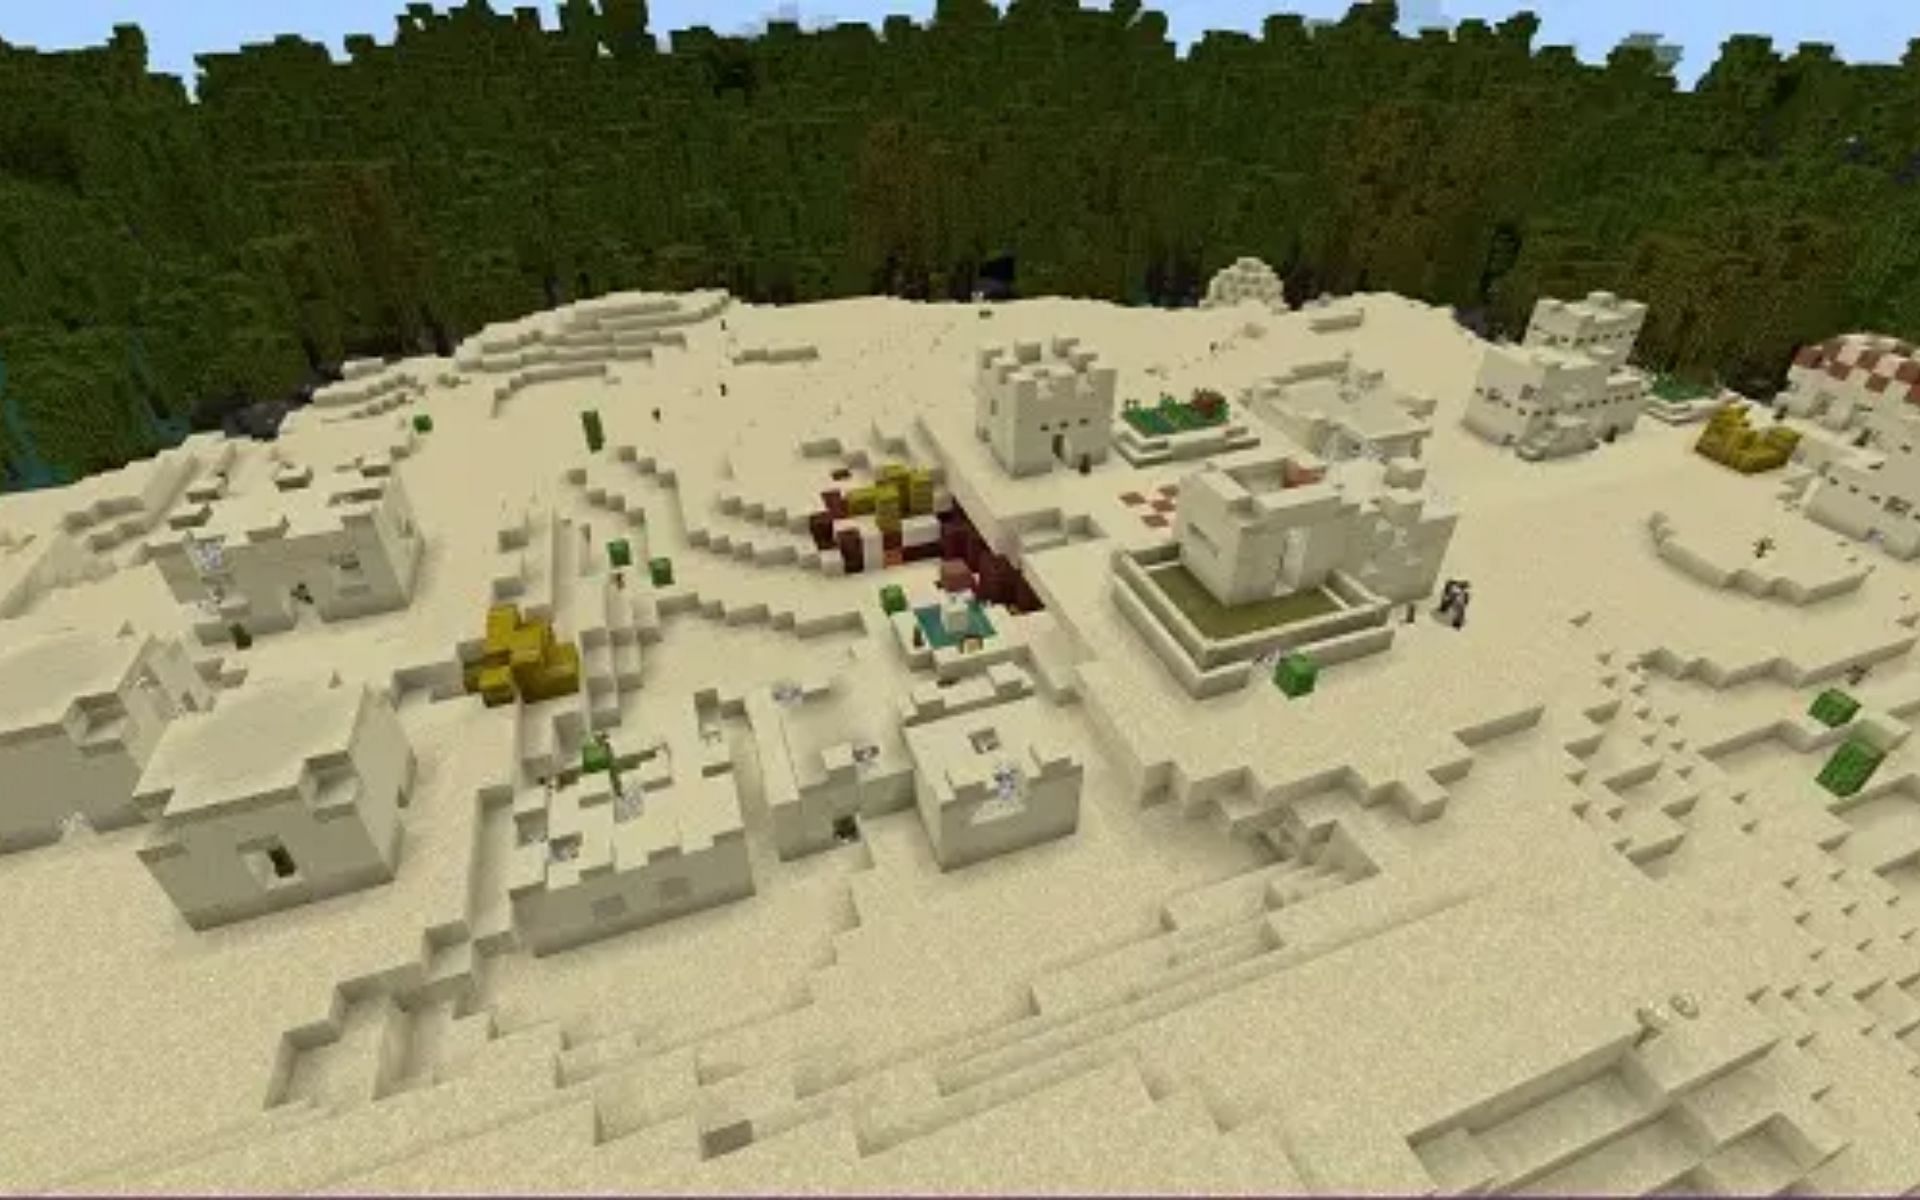 The village seed around a mangrove biome (Image by Minecraft)